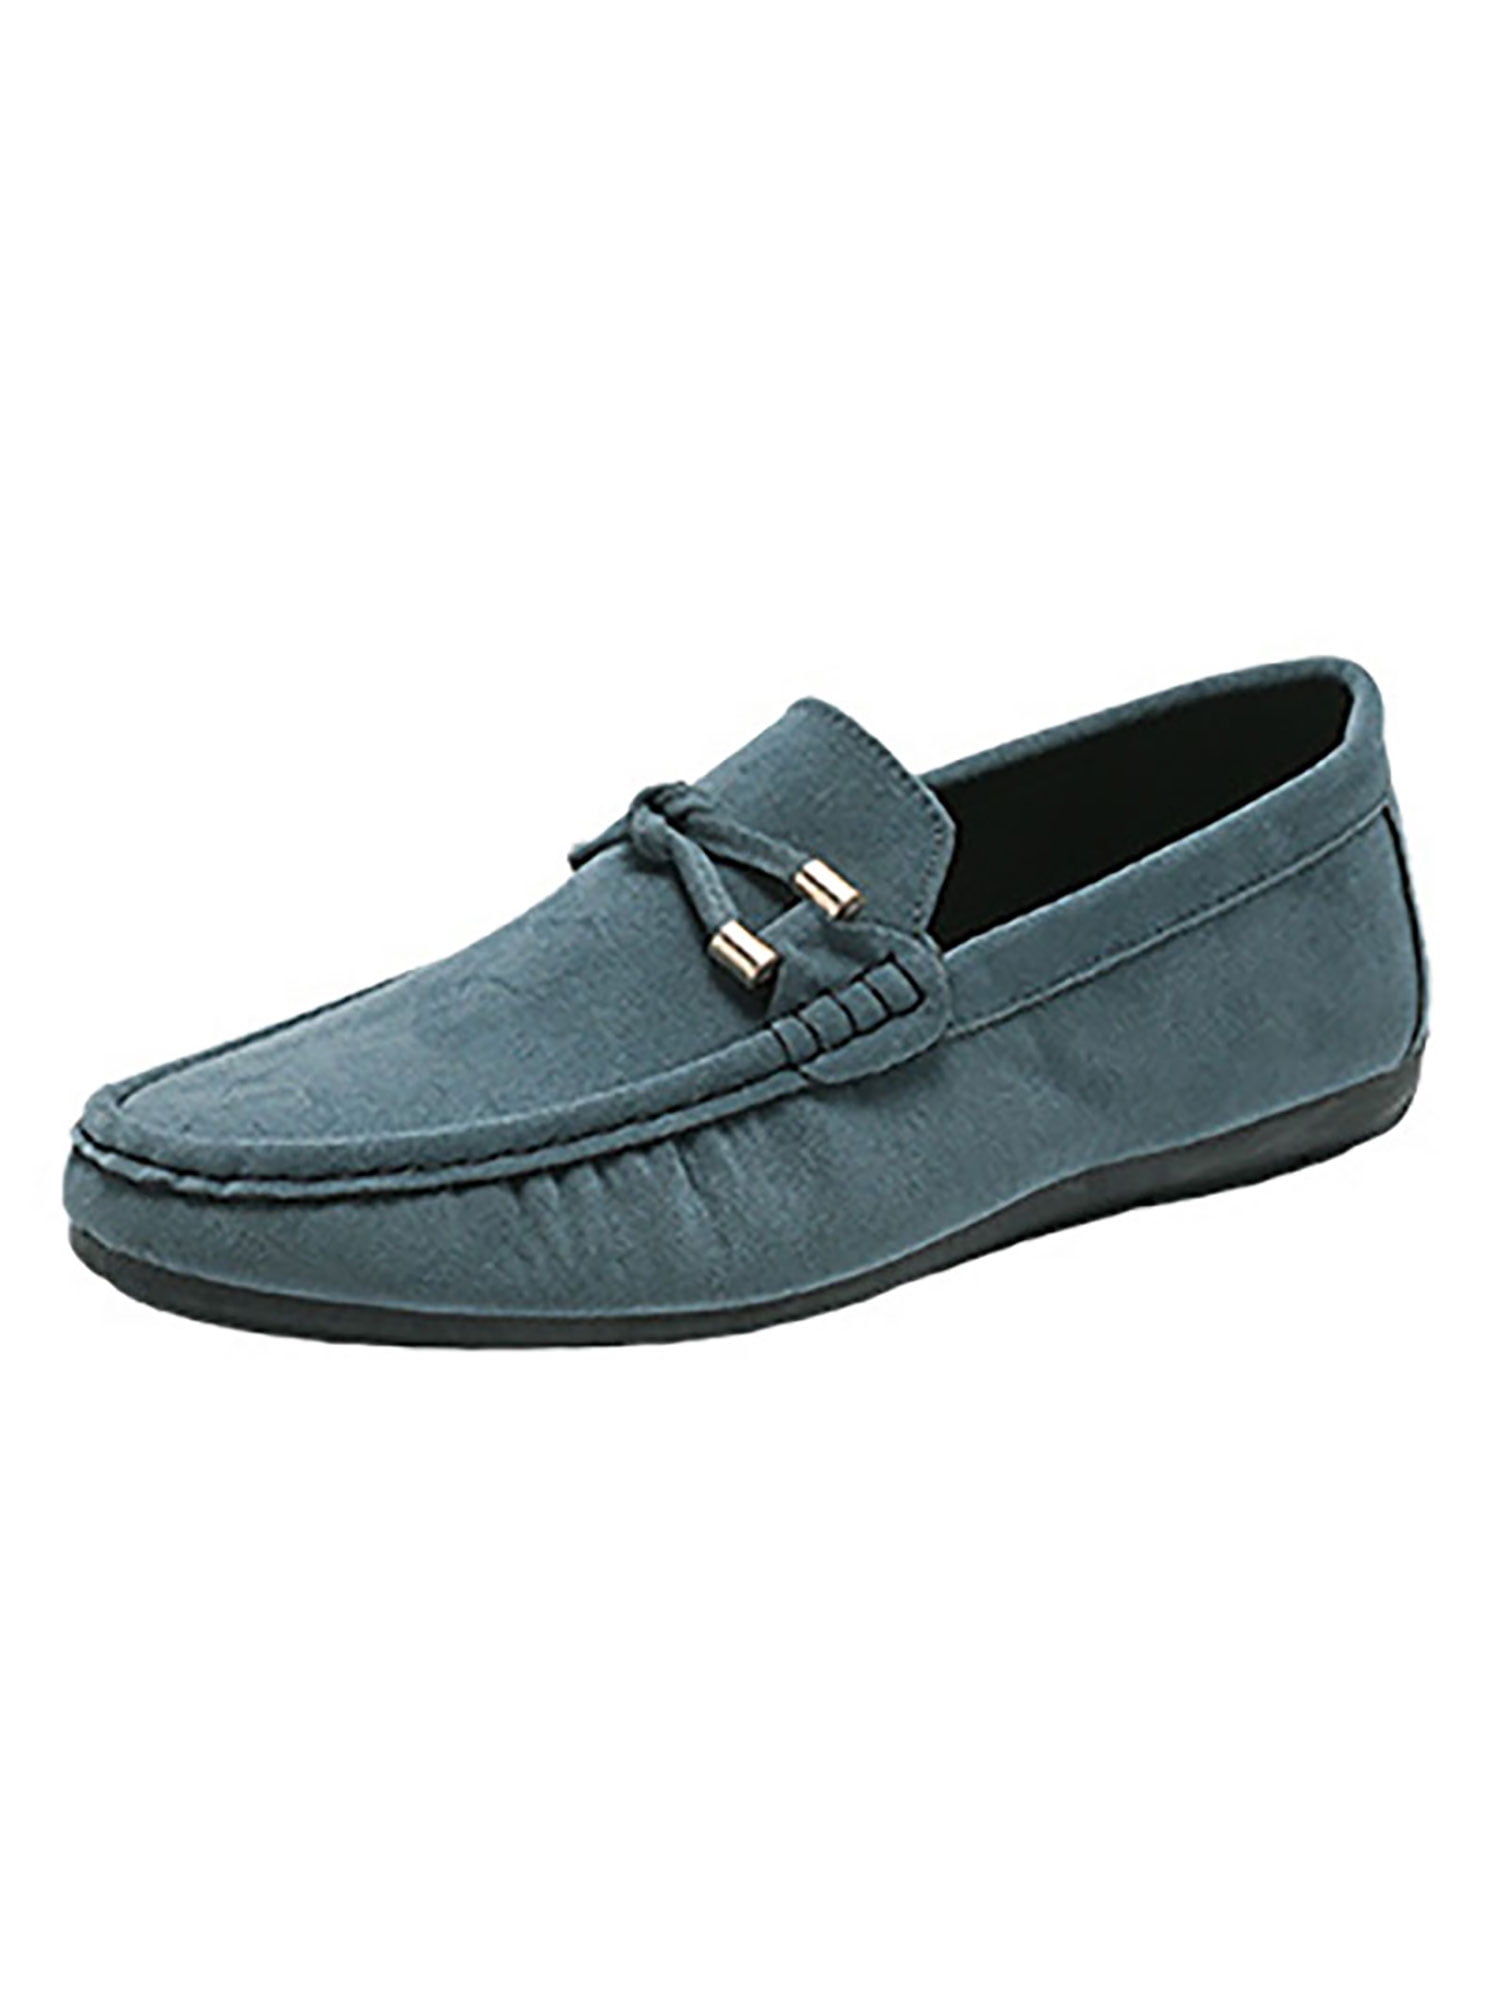 Bellella Mens Shoe Round Toe Flats Slip On Walking Shoes Moccasins Daily Driving Loafers Blue 8 - Walmart.com